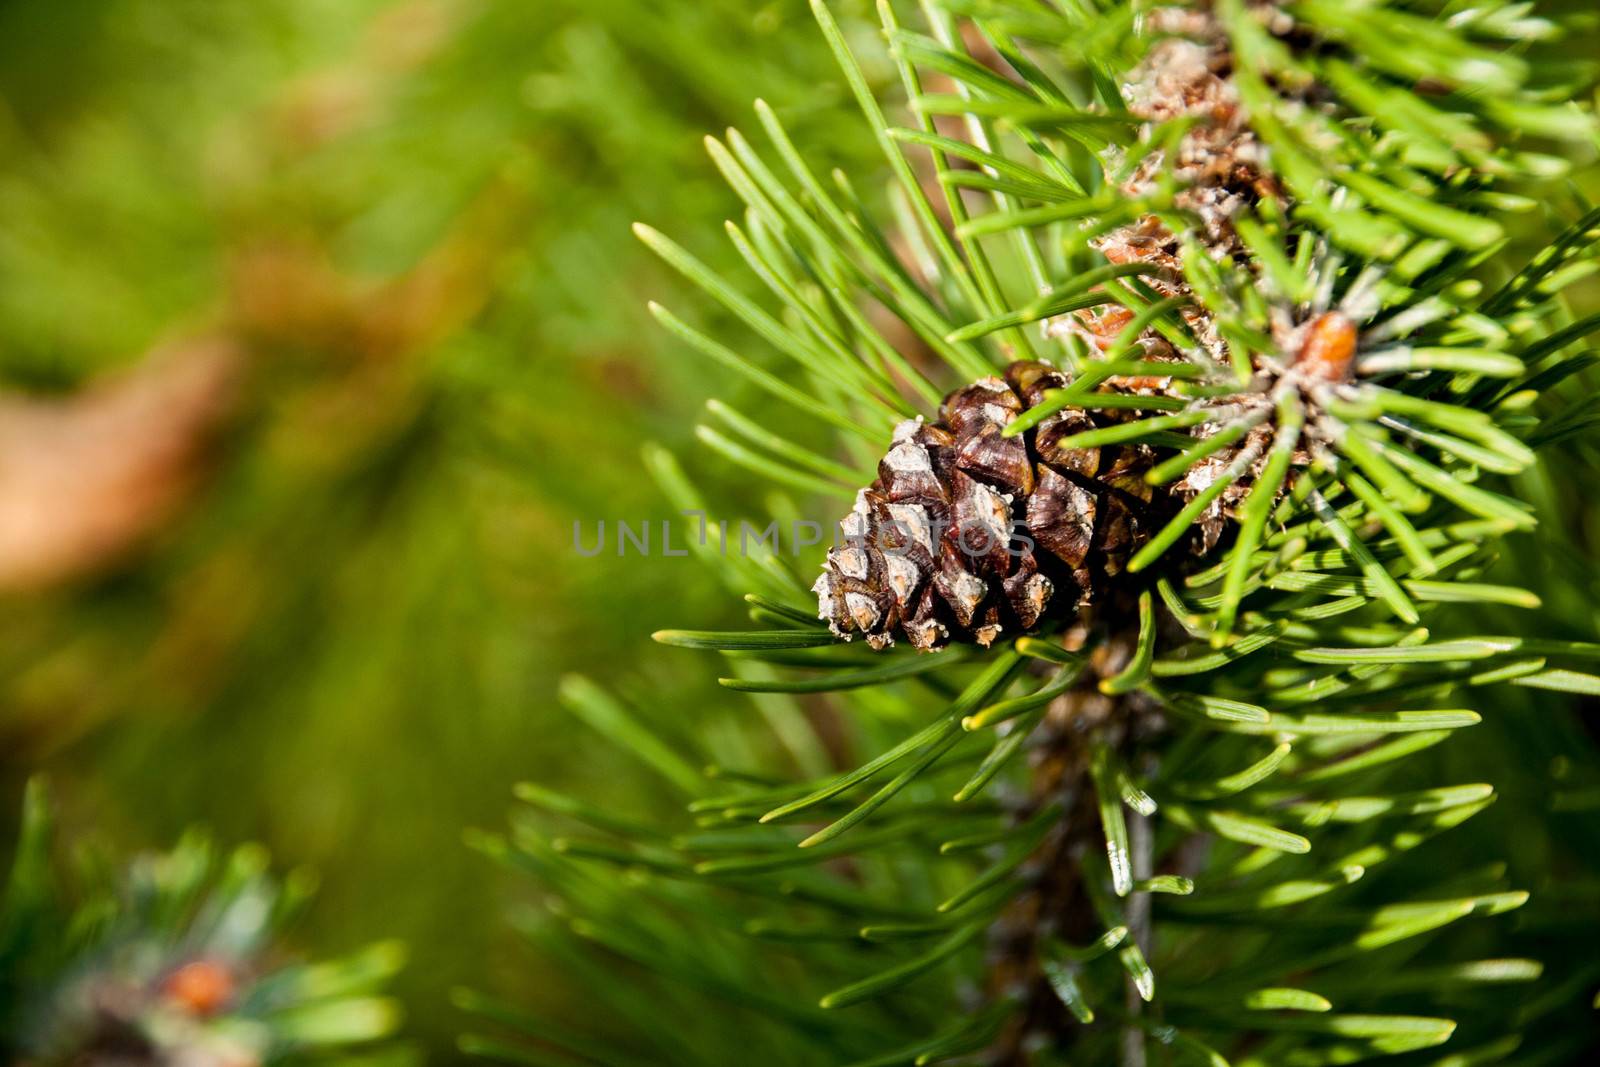 pine cone on a green branch lit by the sun